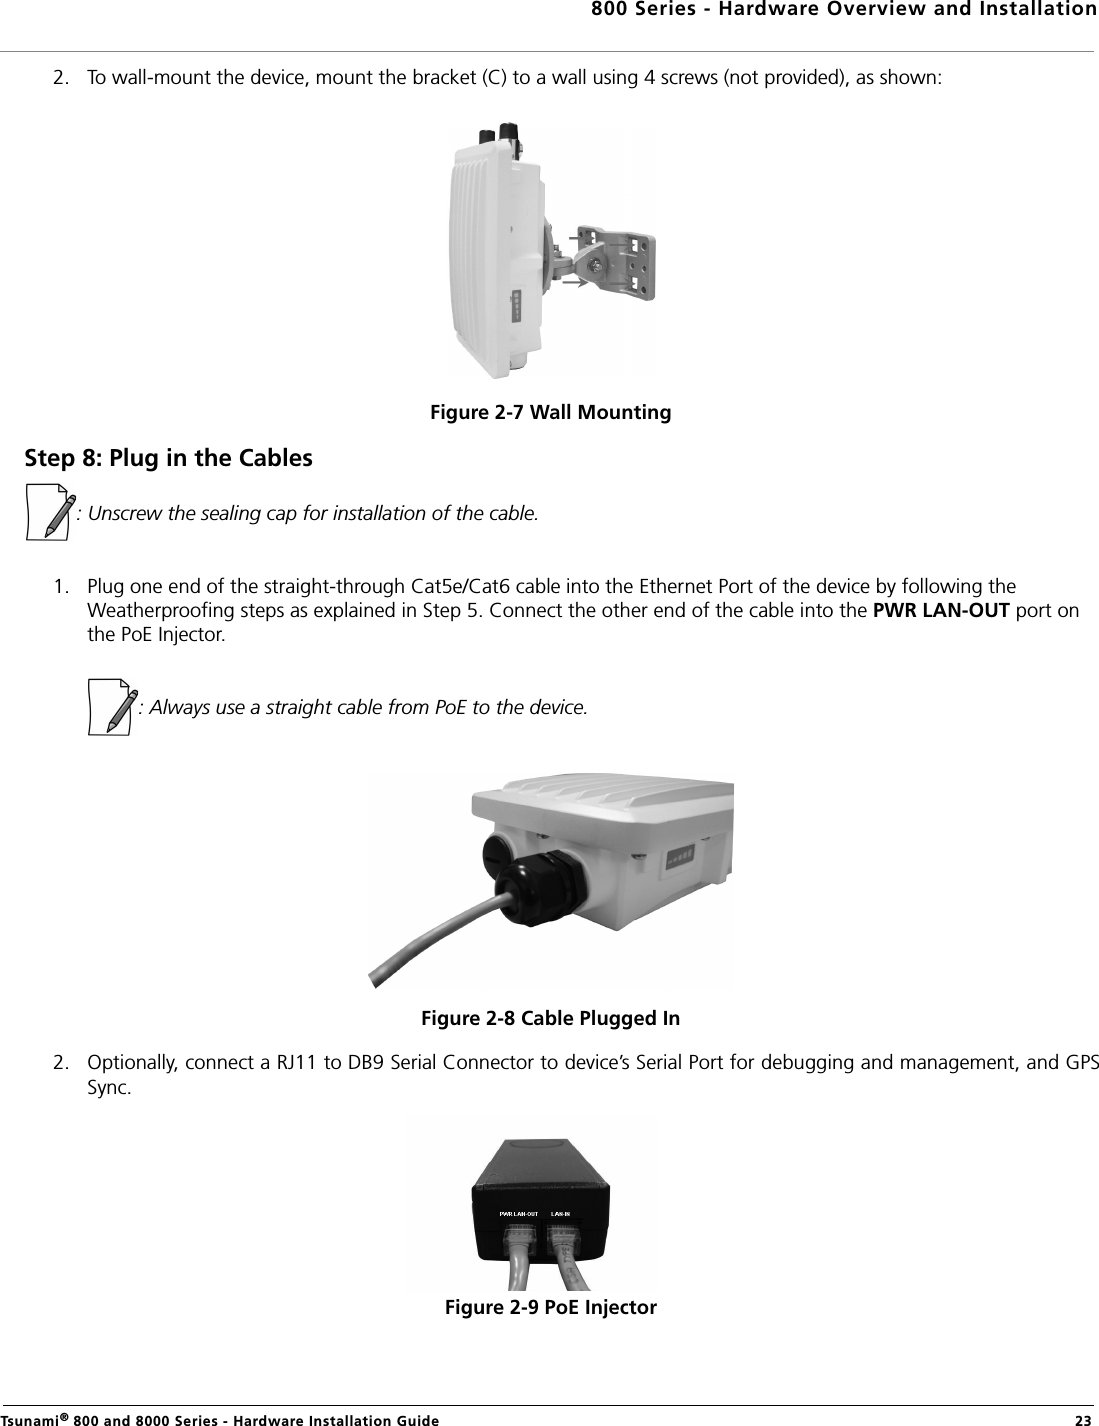 800 Series - Hardware Overview and InstallationTsunami® 800 and 8000 Series - Hardware Installation Guide  232. To wall-mount the device, mount the bracket (C) to a wall using 4 screws (not provided), as shown:Figure 2-7 Wall MountingStep 8: Plug in the Cables: Unscrew the sealing cap for installation of the cable.1. Plug one end of the straight-through Cat5e/Cat6 cable into the Ethernet Port of the device by following the Weatherproofing steps as explained in Step 5. Connect the other end of the cable into the PWR LAN-OUT port on the PoE Injector.            : Always use a straight cable from PoE to the device.Figure 2-8 Cable Plugged In2. Optionally, connect a RJ11 to DB9 Serial Connector to device’s Serial Port for debugging and management, and GPSSync.Figure 2-9 PoE Injector